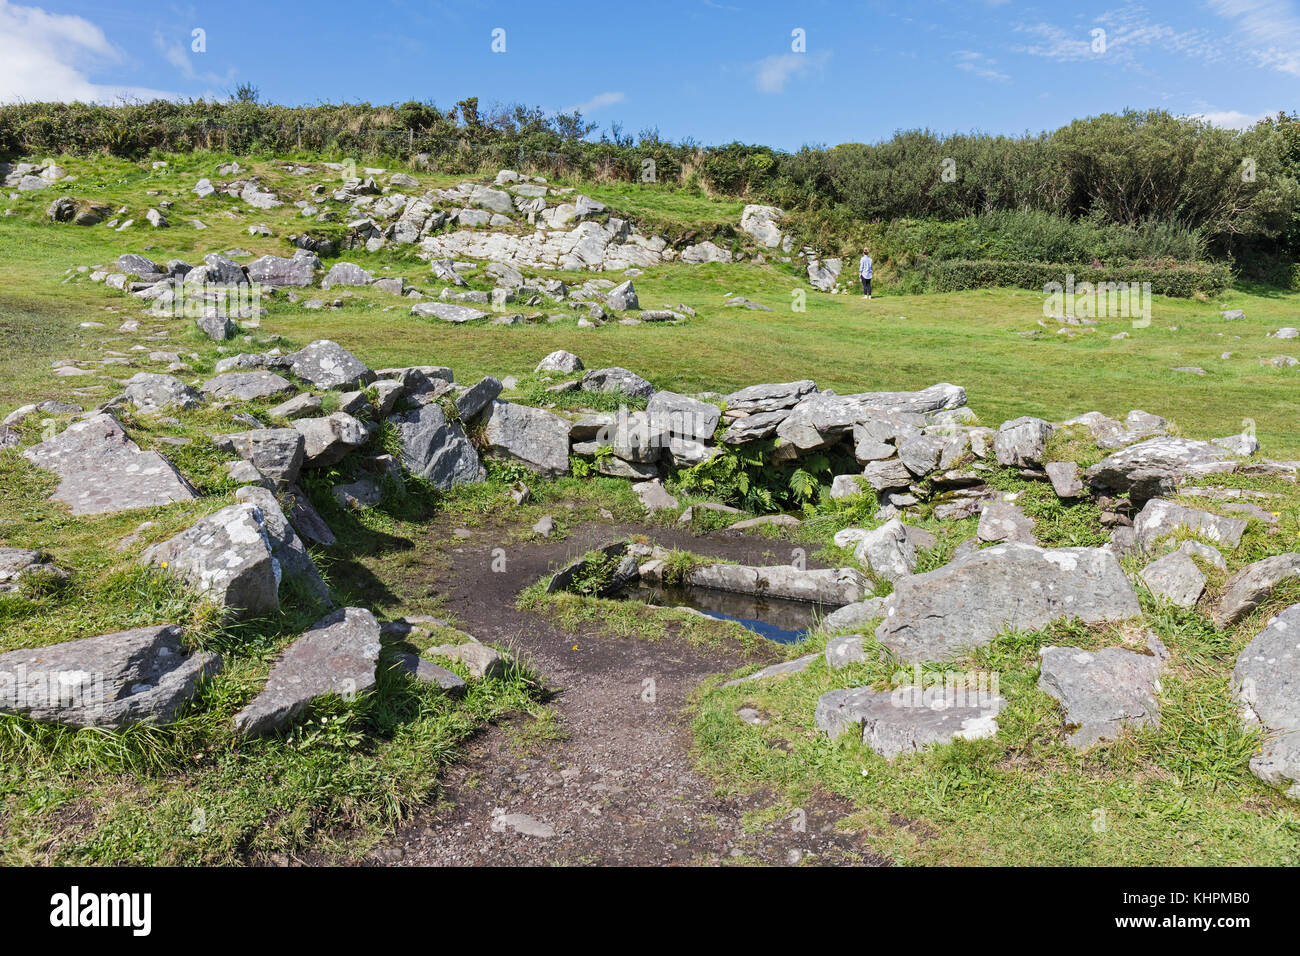 near Glandore, County Cork, Republic of Ireland.  The fulacht fiadh, an ancient cooking place, at the site of the Drombeg recumbent stone circle.  The Stock Photo